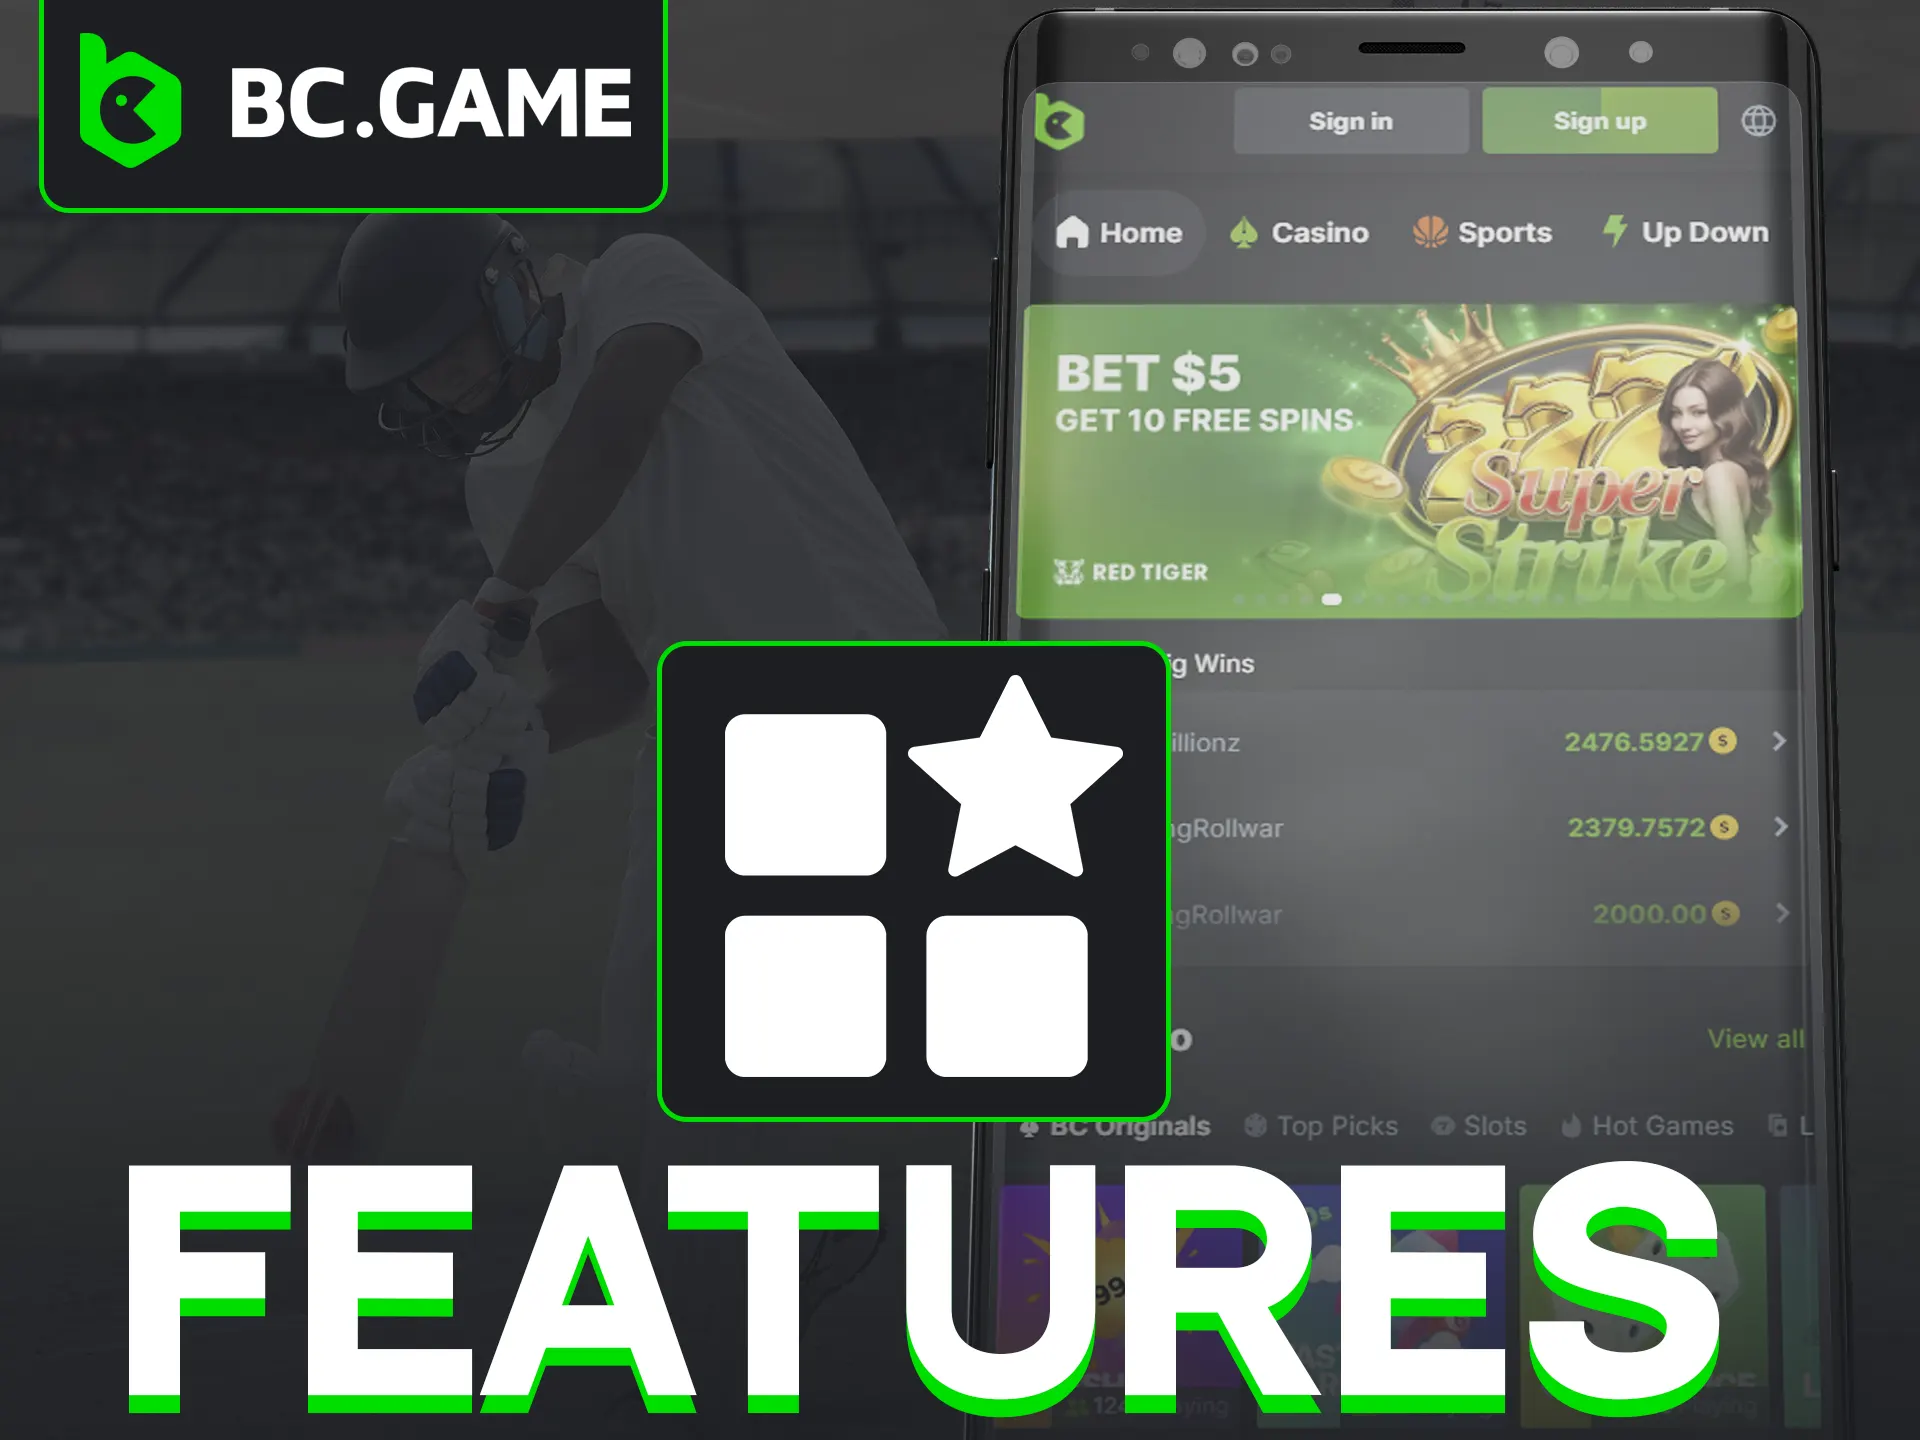 BC Game App enhances gambling with various features.